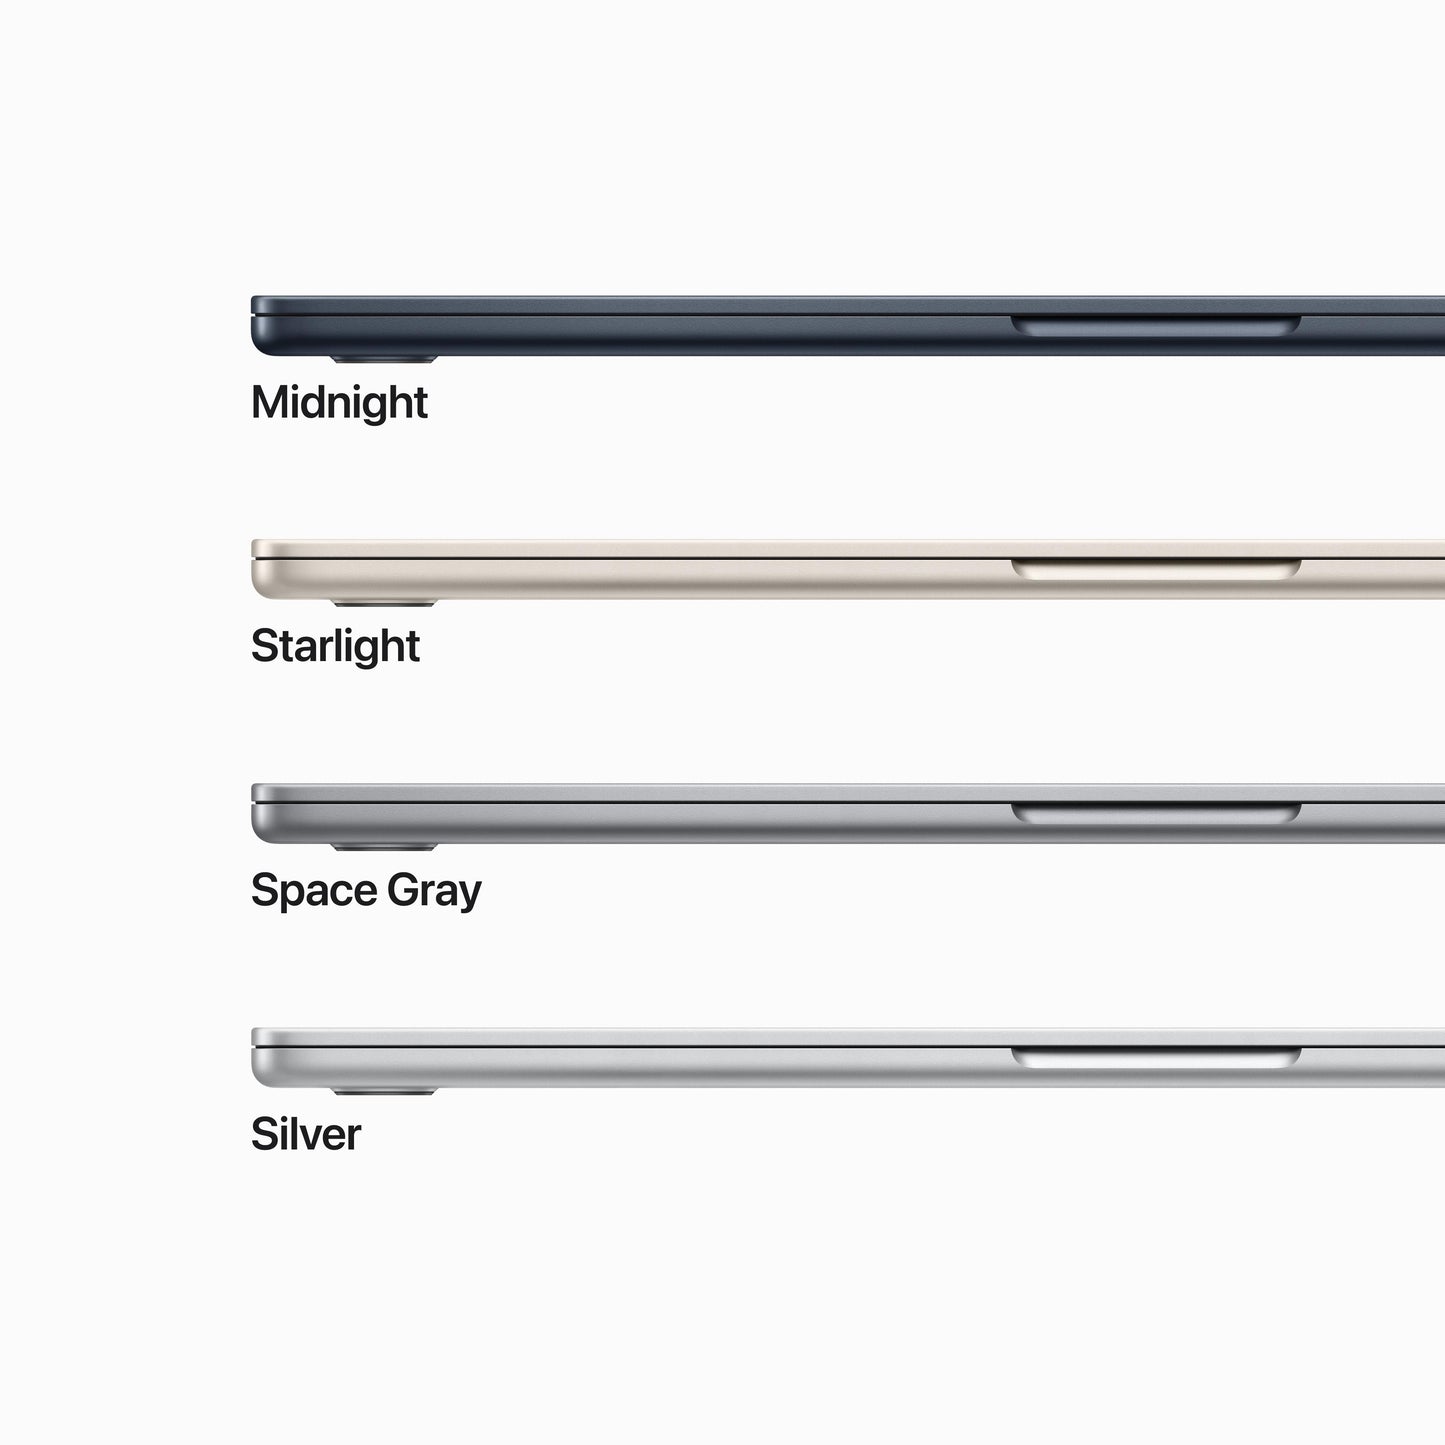 15-inch MacBook Air: Apple M2 chip with 8_core CPU and 10_core GPU, 256GB SSD - Space Grey